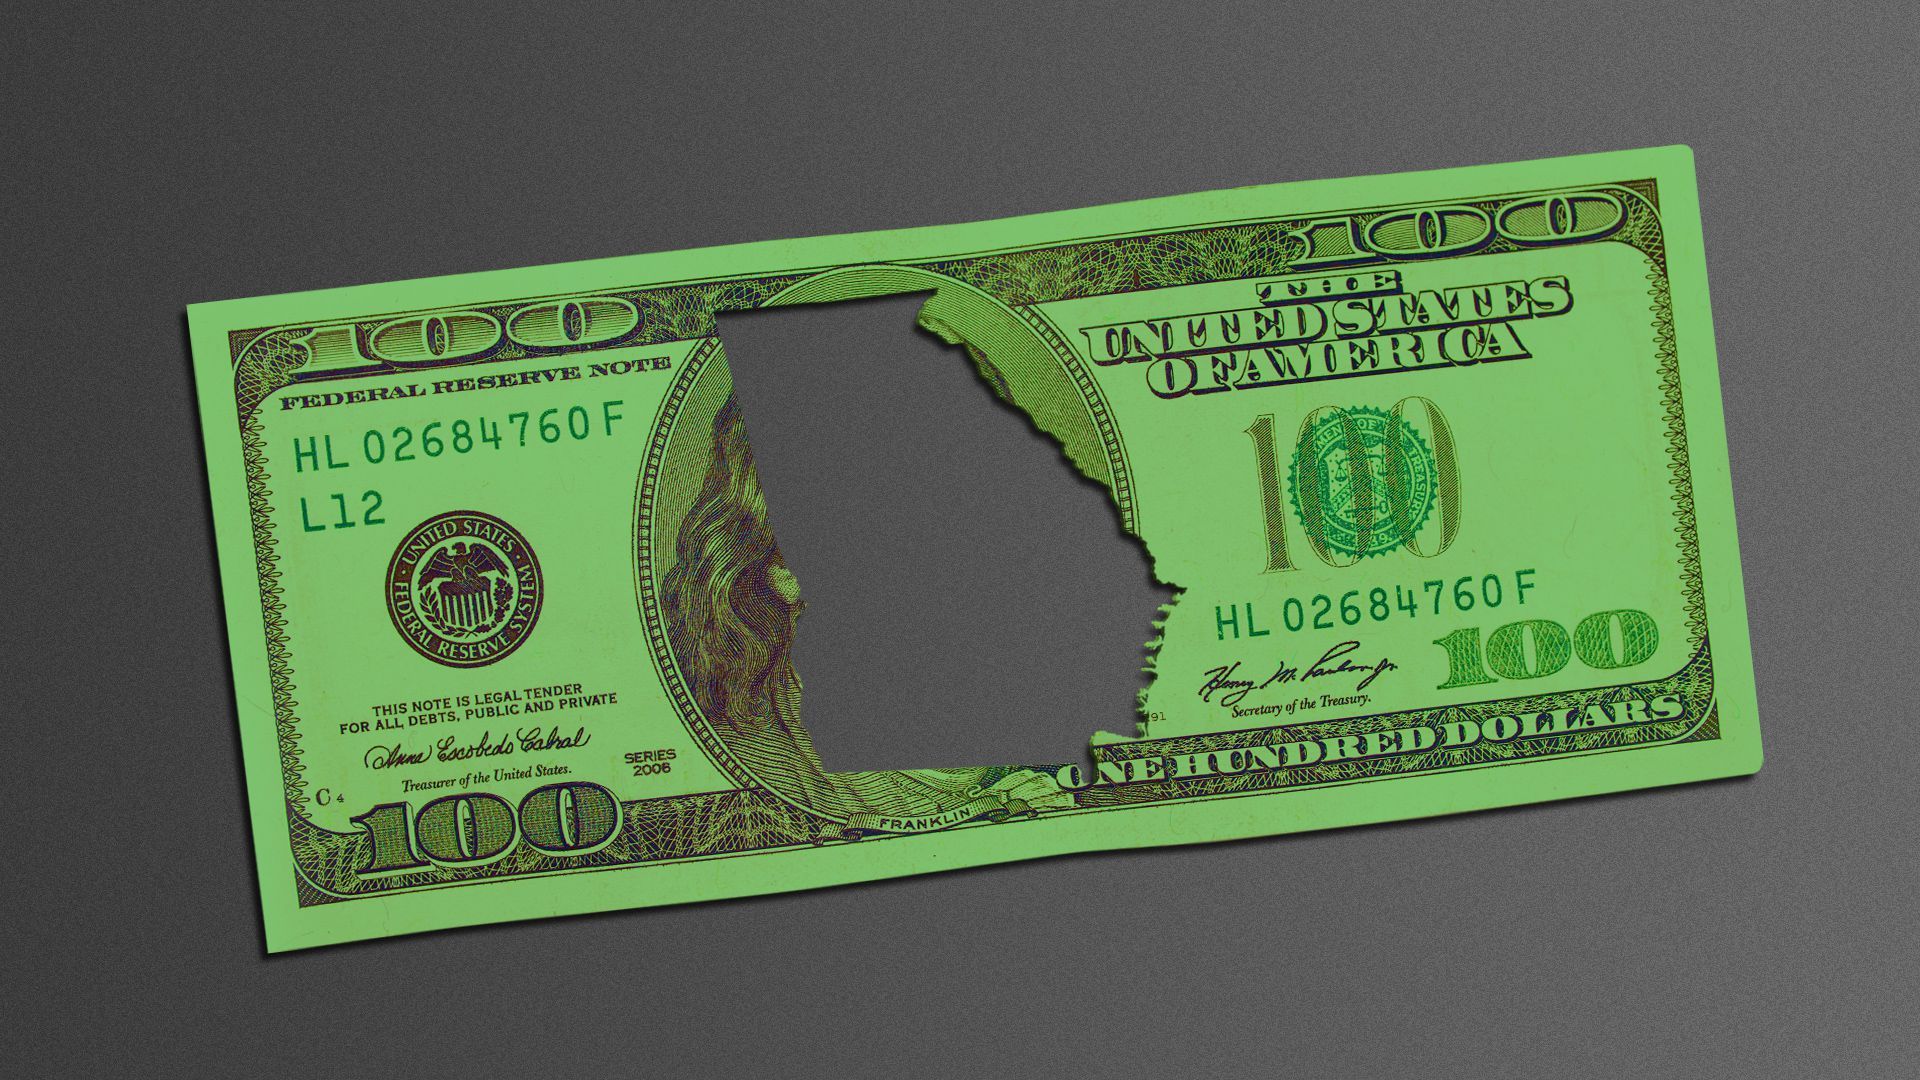 Illustration of a hundred dollar bill with a Georgia-shaped hole punched out of the center. 